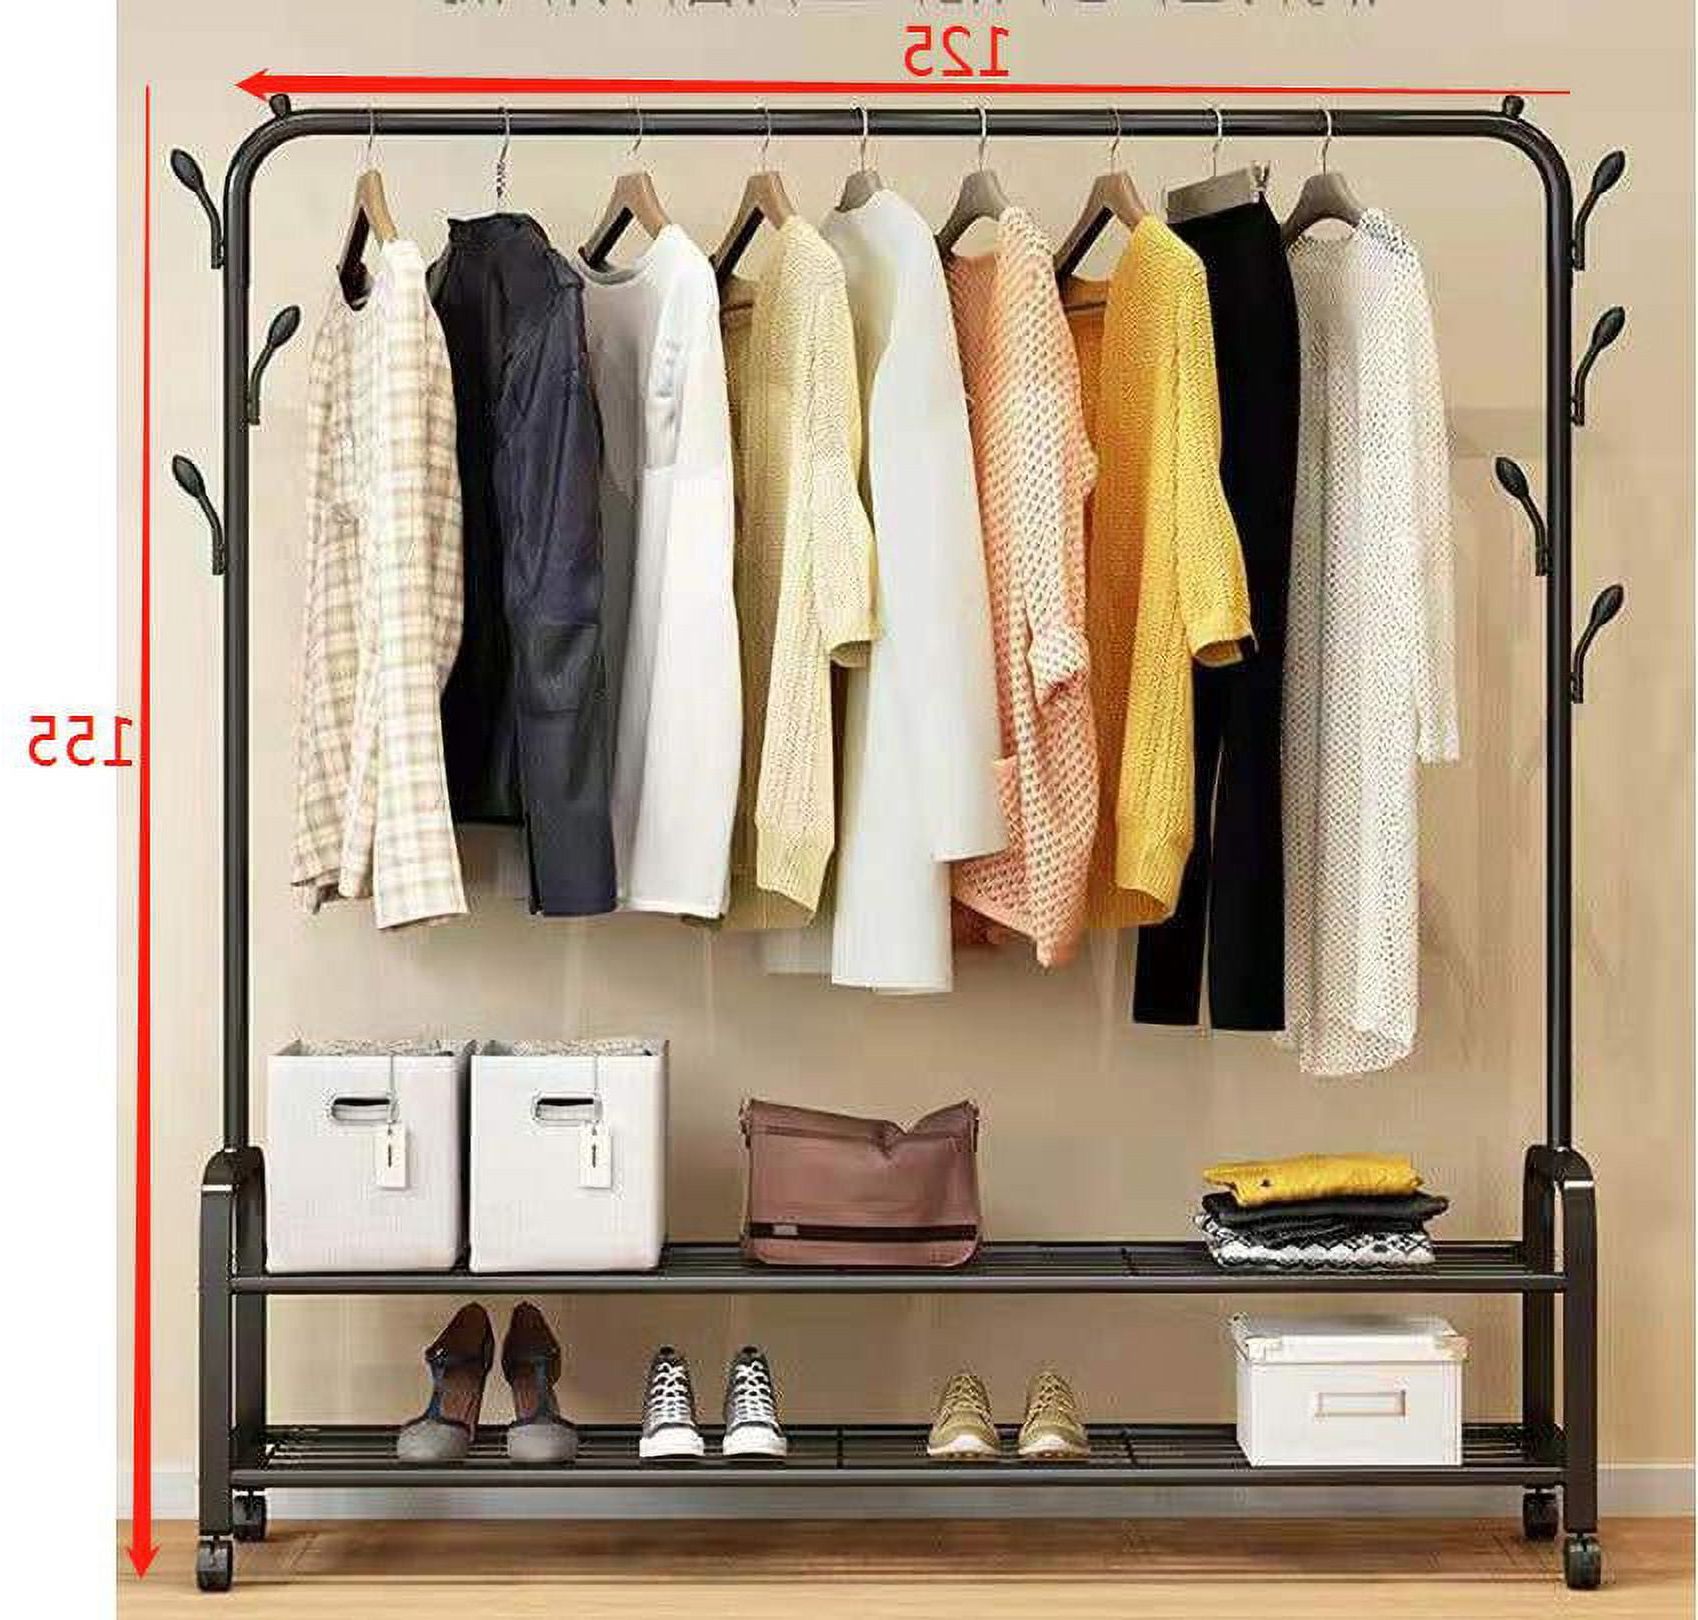 Heavy Duty Metal Garment Rack Rail Rolling Hanging Coat Rack Shelf Stand  Closet Organizer Clothes Wardrobe With Wheel Design For Home Bedroom Easy  To Assemble 49.2* (View 7 of 20)